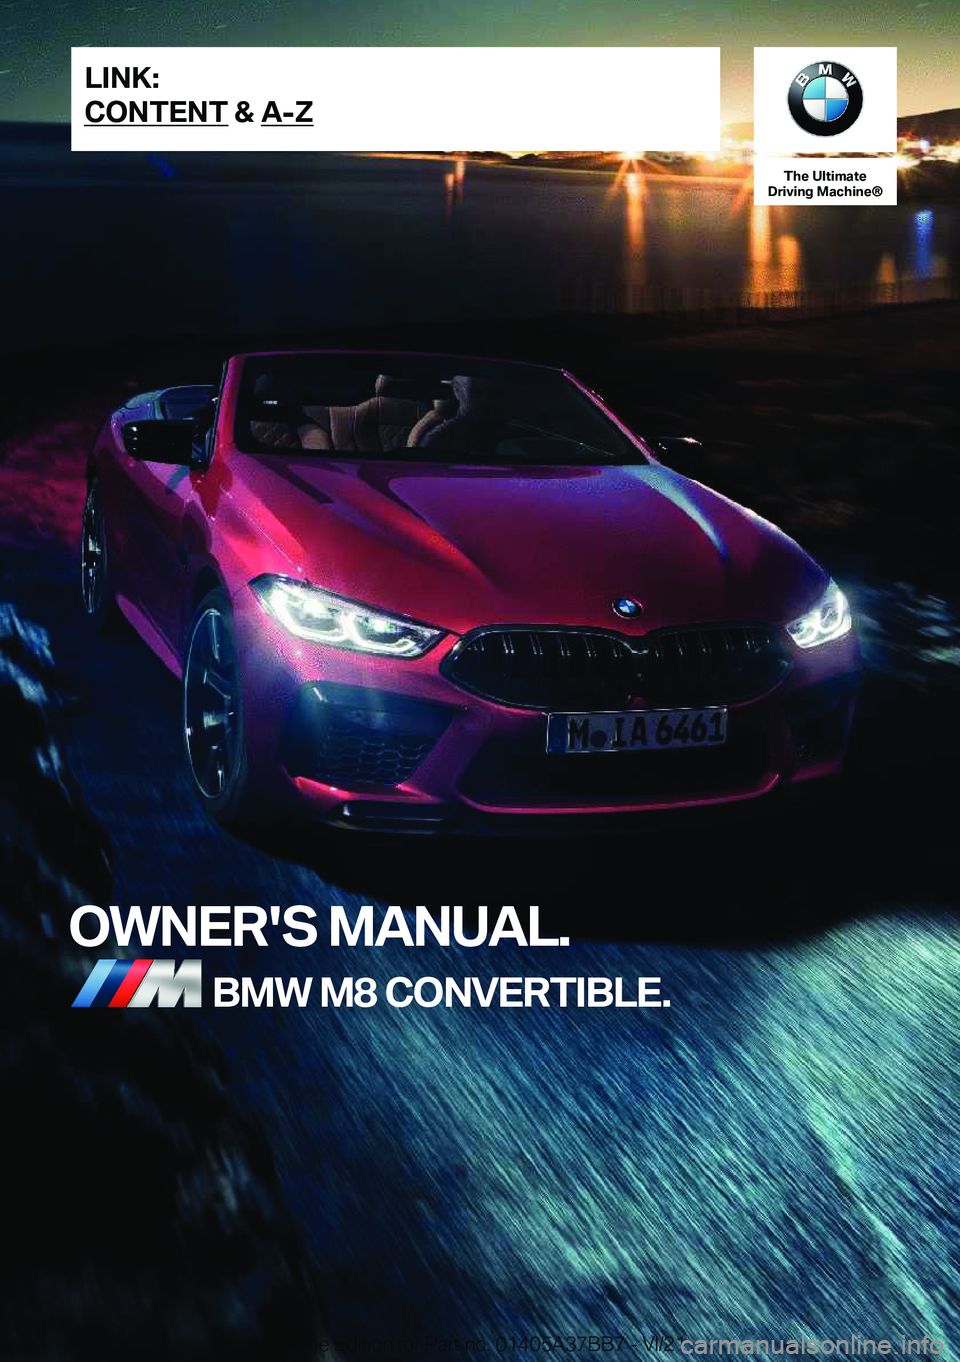 BMW M8 CONVERTIBLE 2022  Owners Manual �T�h�e��U�l�t�i�m�a�t�e
�D�r�i�v�i�n�g��M�a�c�h�i�n�e�n
�O�W�N�E�R�'�S��M�A�N�U�A�L�.�B�M�W��M�8��C�O�N�V�E�R�T�I�B�L�E�.�L�I�N�K�:
�C�O�N�T�E�N�T��&��A�-�Z�O�n�l�i�n�e��E�d�i�t�i�o�n��f�